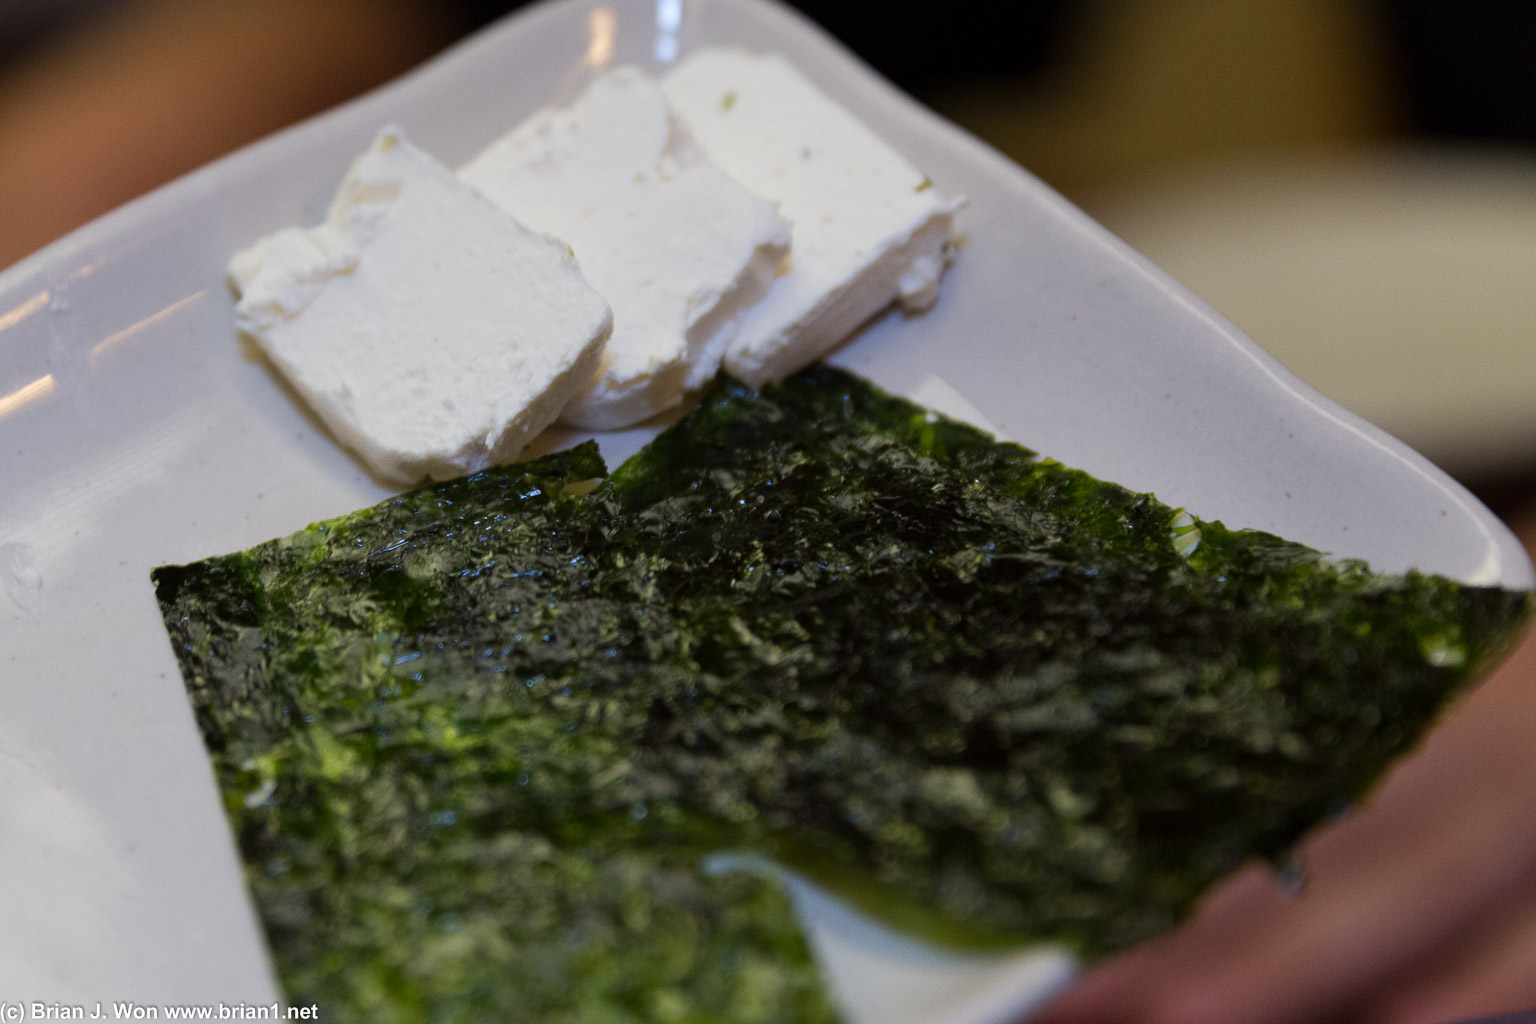 Cream cheese and seaweed is exactly that. Cream cheese and seaweed.